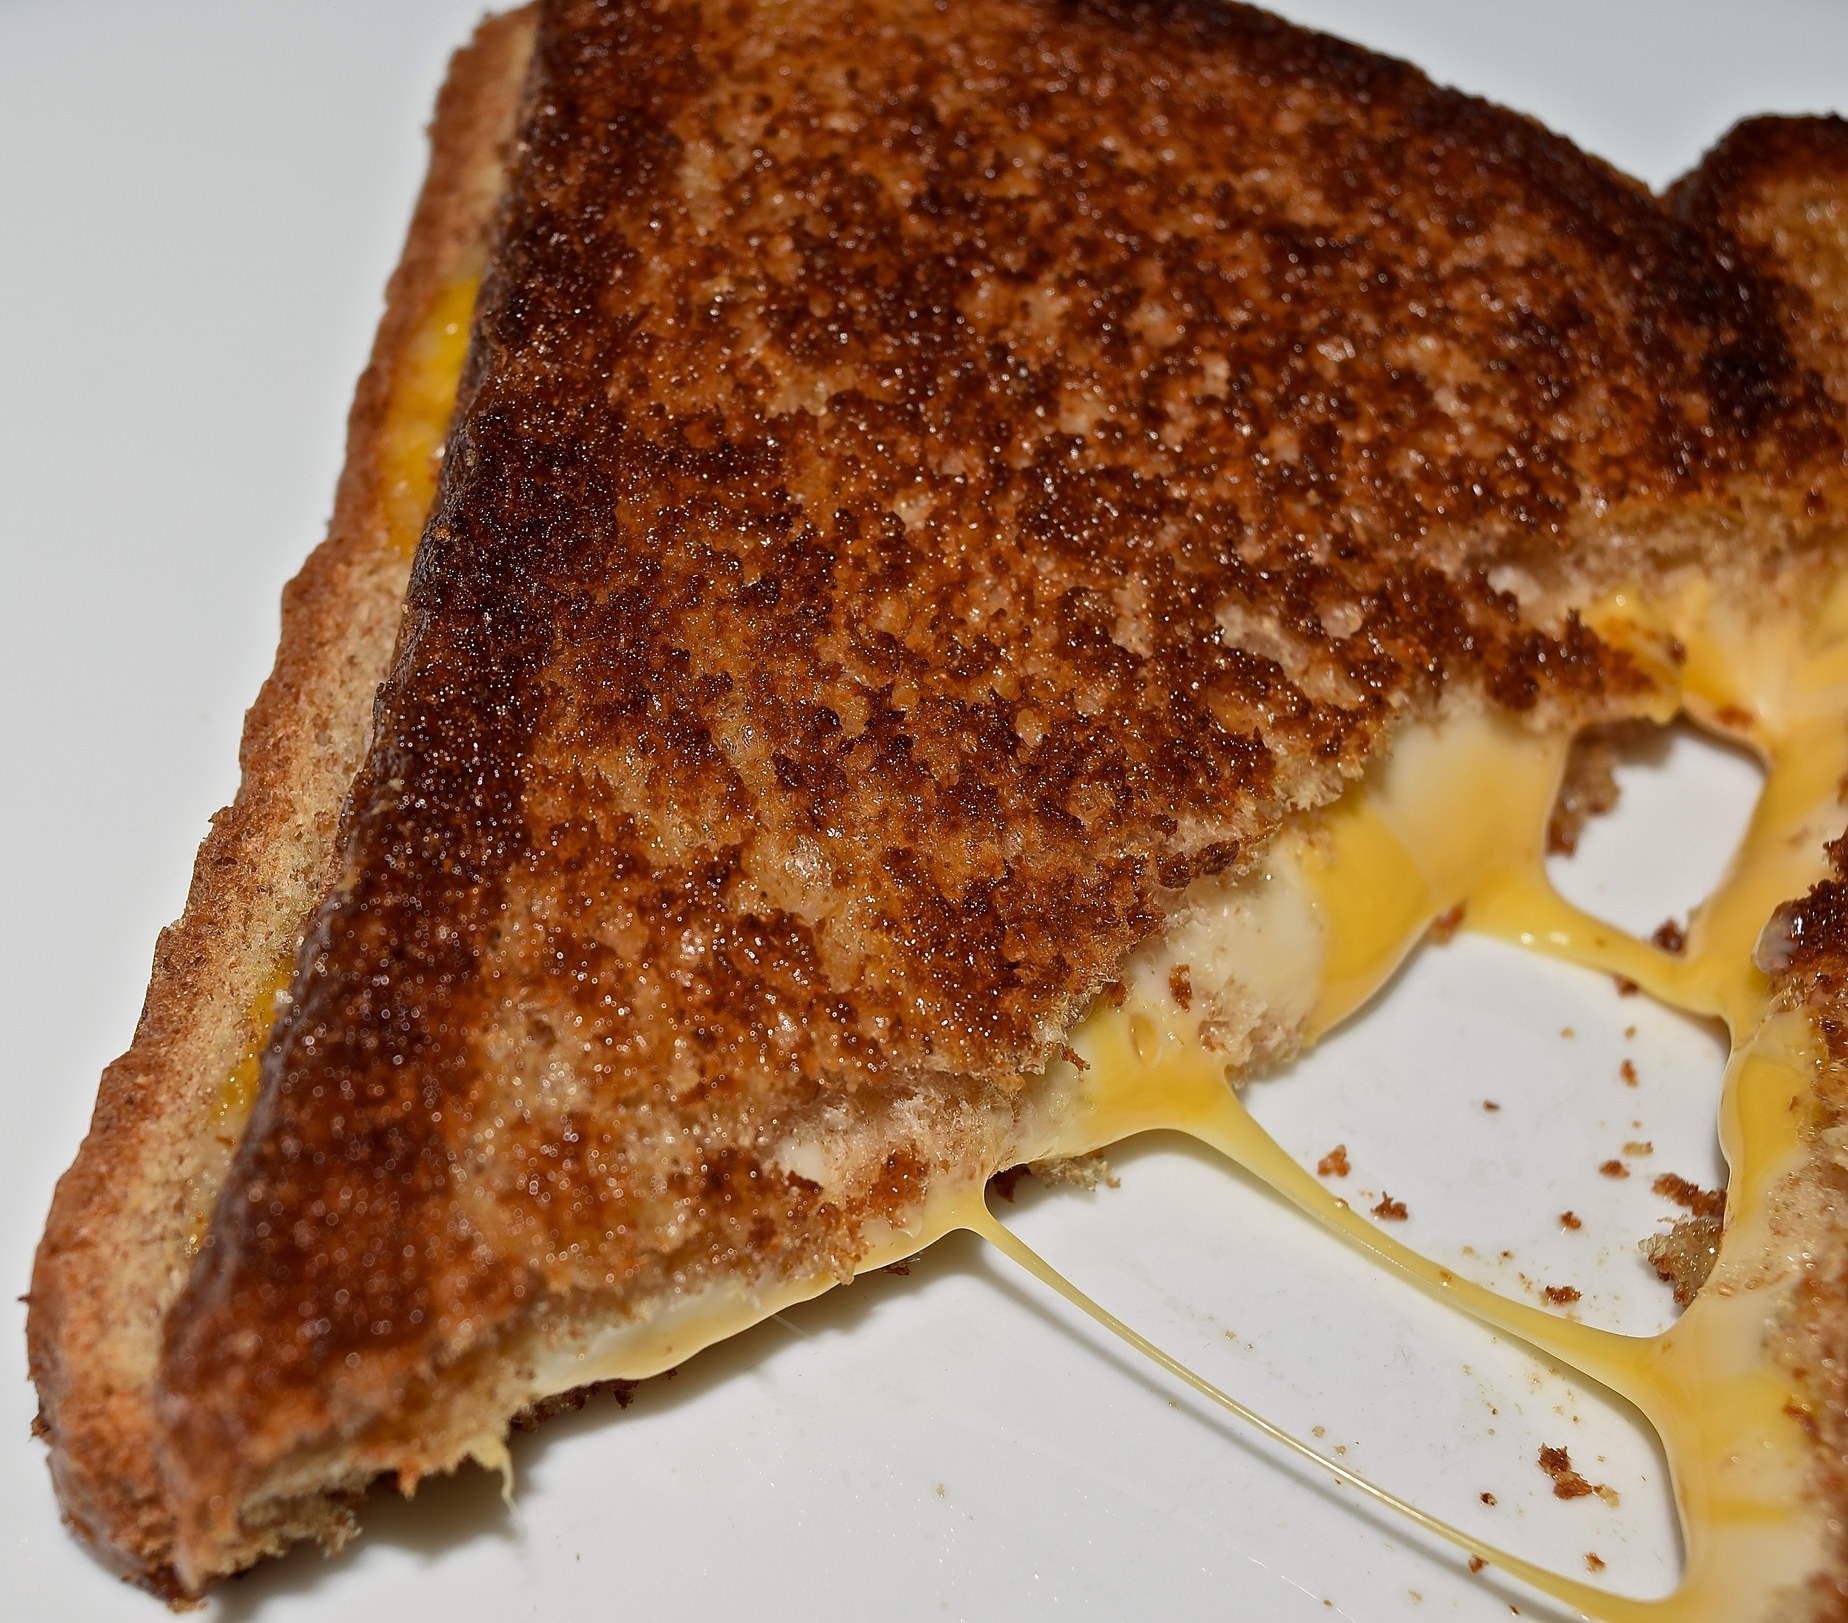 Half of a gooey grilled cheese sandwich